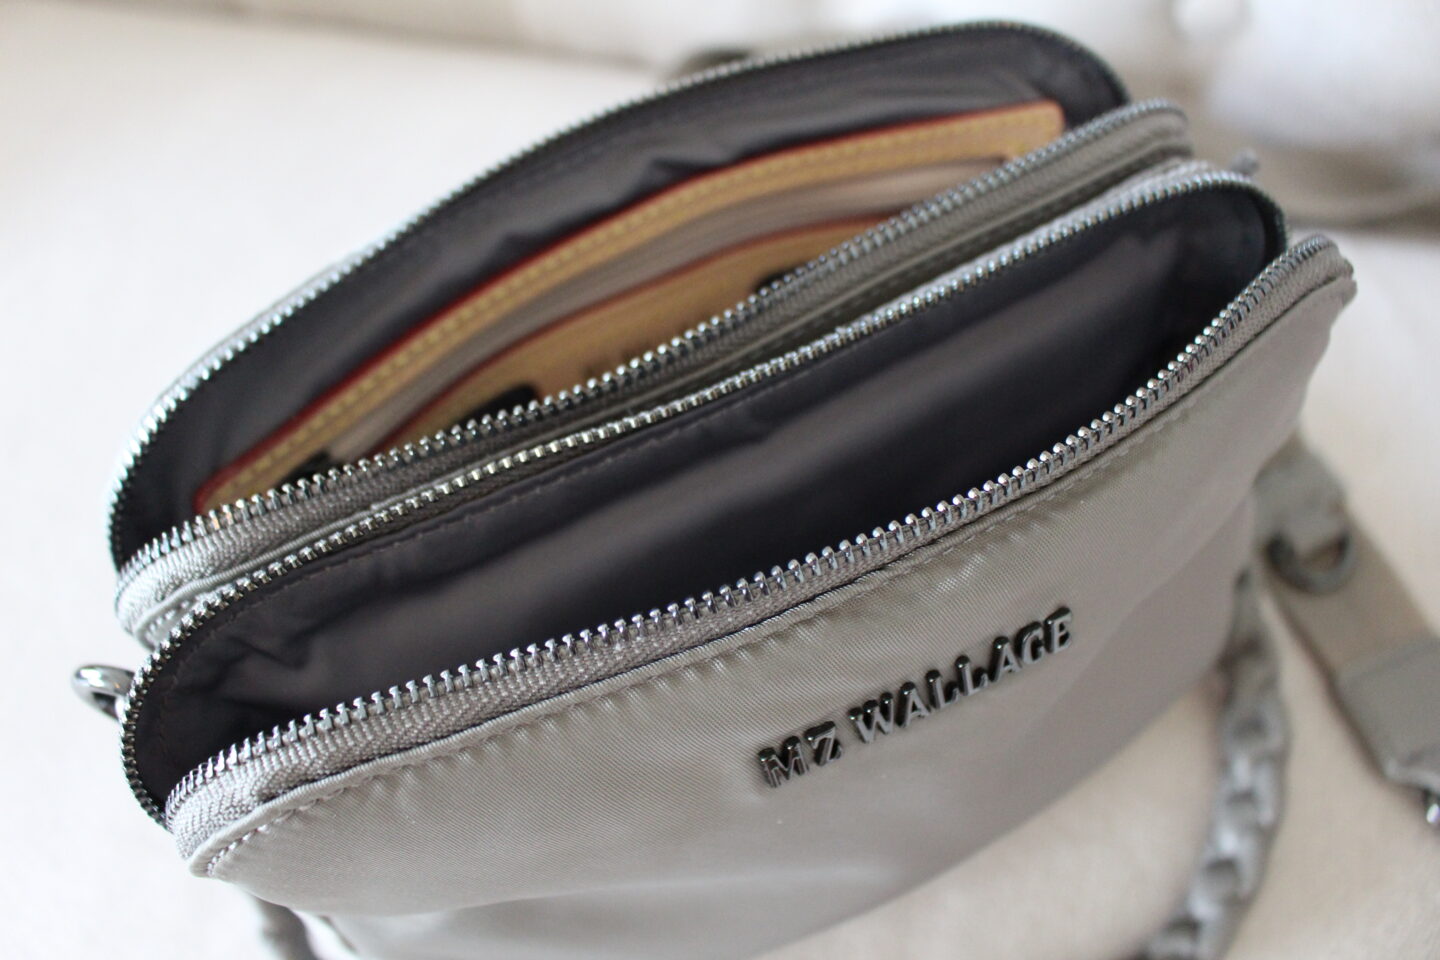 MZ WALLACE, Shoulder Bag Review & Packing Video!